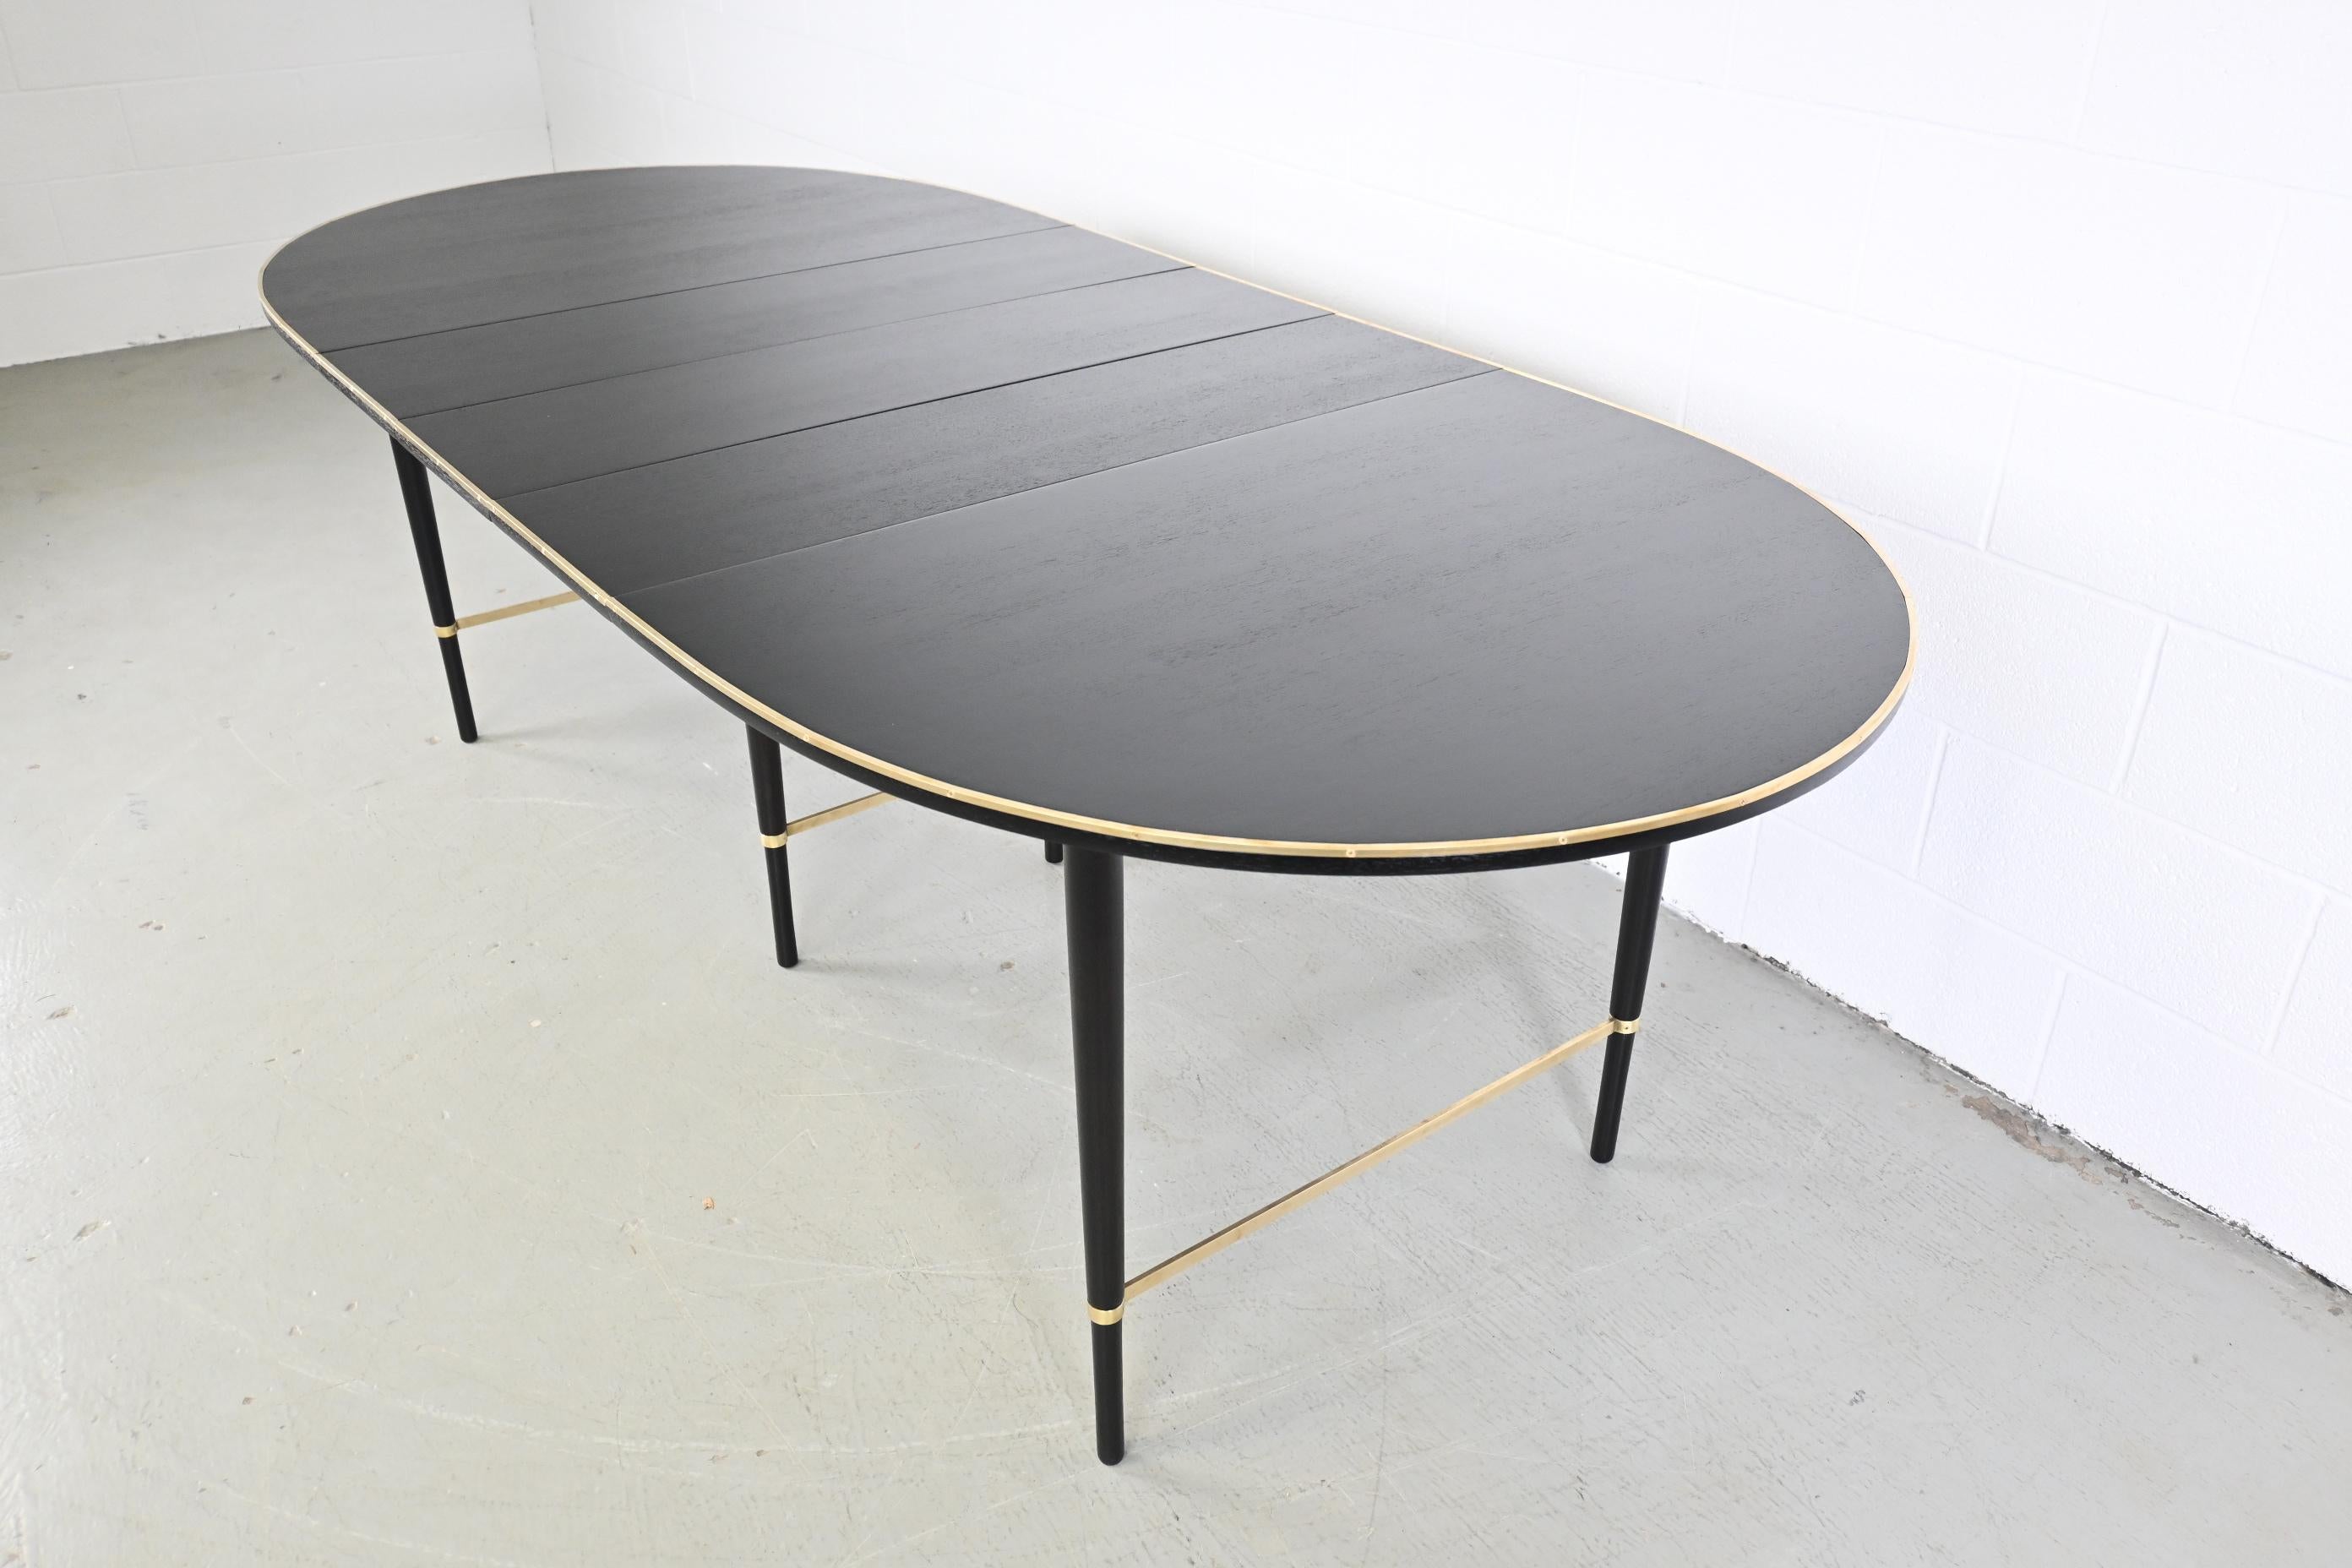 Paul McCobb for Calvin furniture ebonized mahogany and brass extension dining table

Calvin Furniture, USA, 1950s

61.13 Wide x 41.25 Deep x 29.25 High. Extends up to 94.13